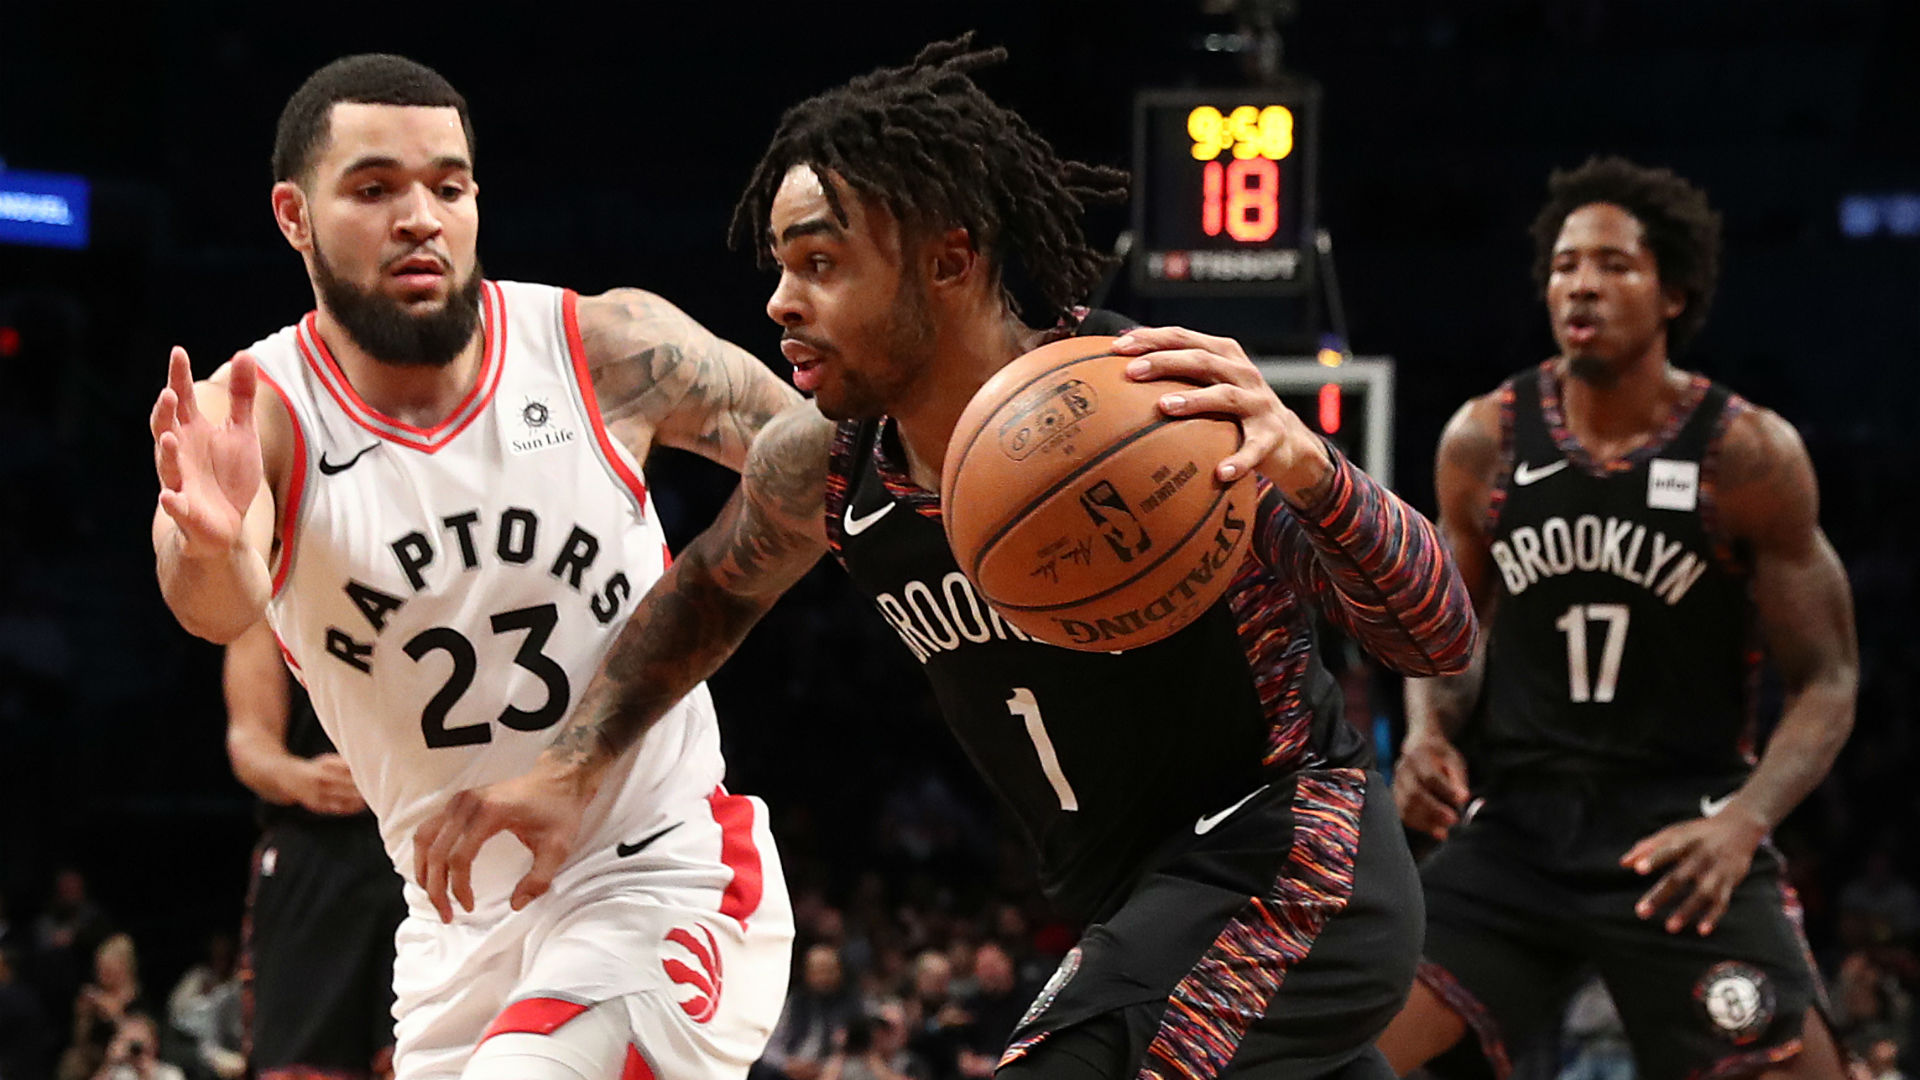 Toronto Raptors vs. Brooklyn Nets: Game preview, live stream, TV channel, start time ...